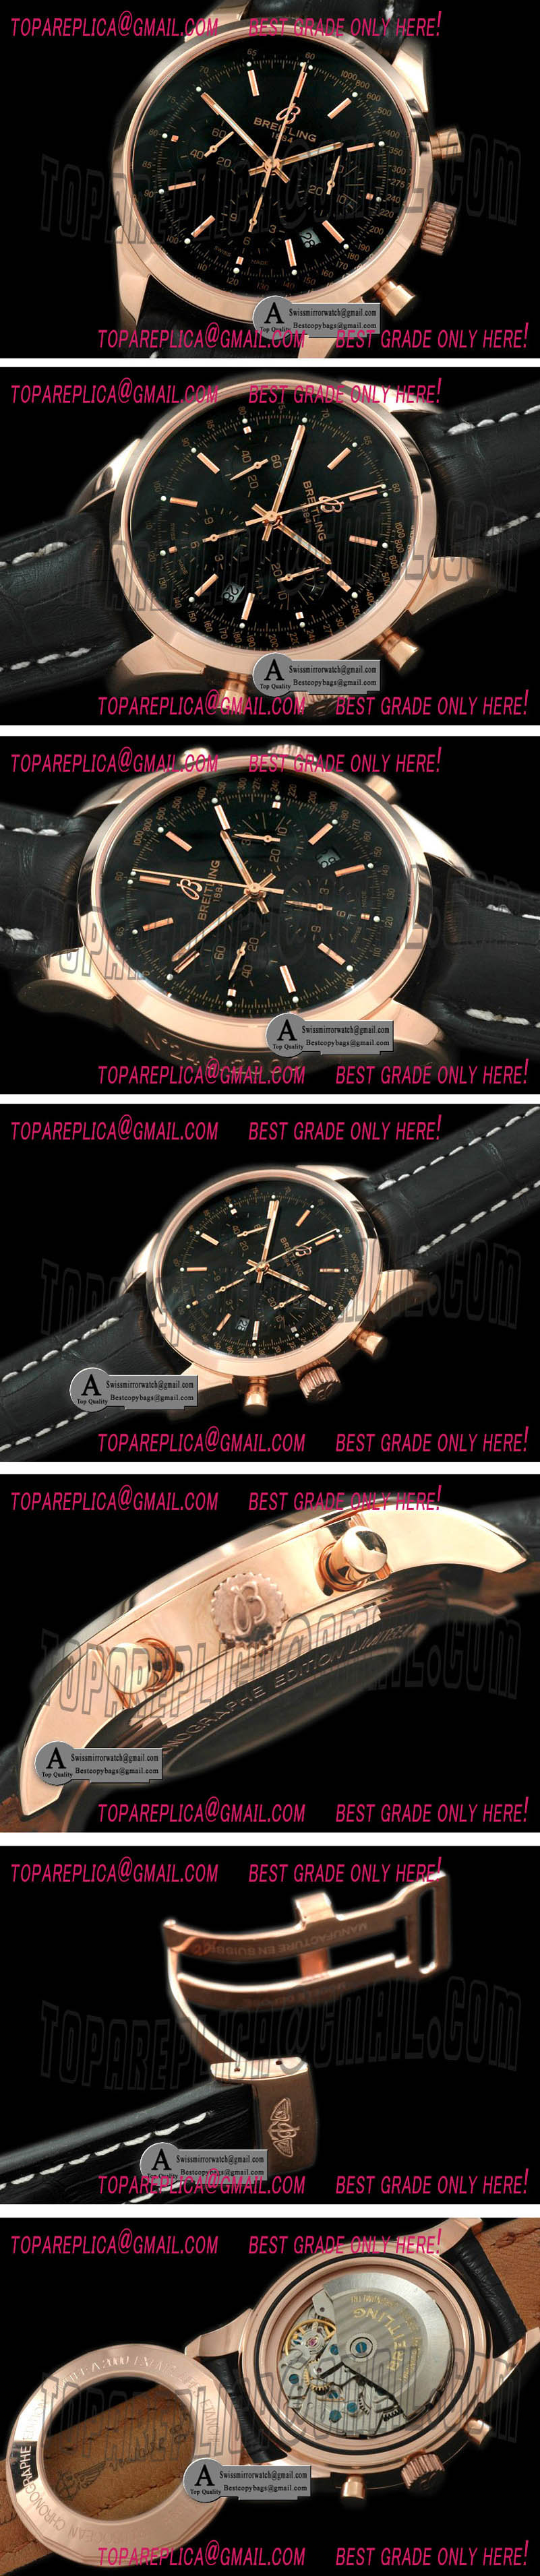 Breitling RB015212/BB16 TransOcean Chrono Men Rose Gold/Leather Black A-7750 28800bph Replica Watches